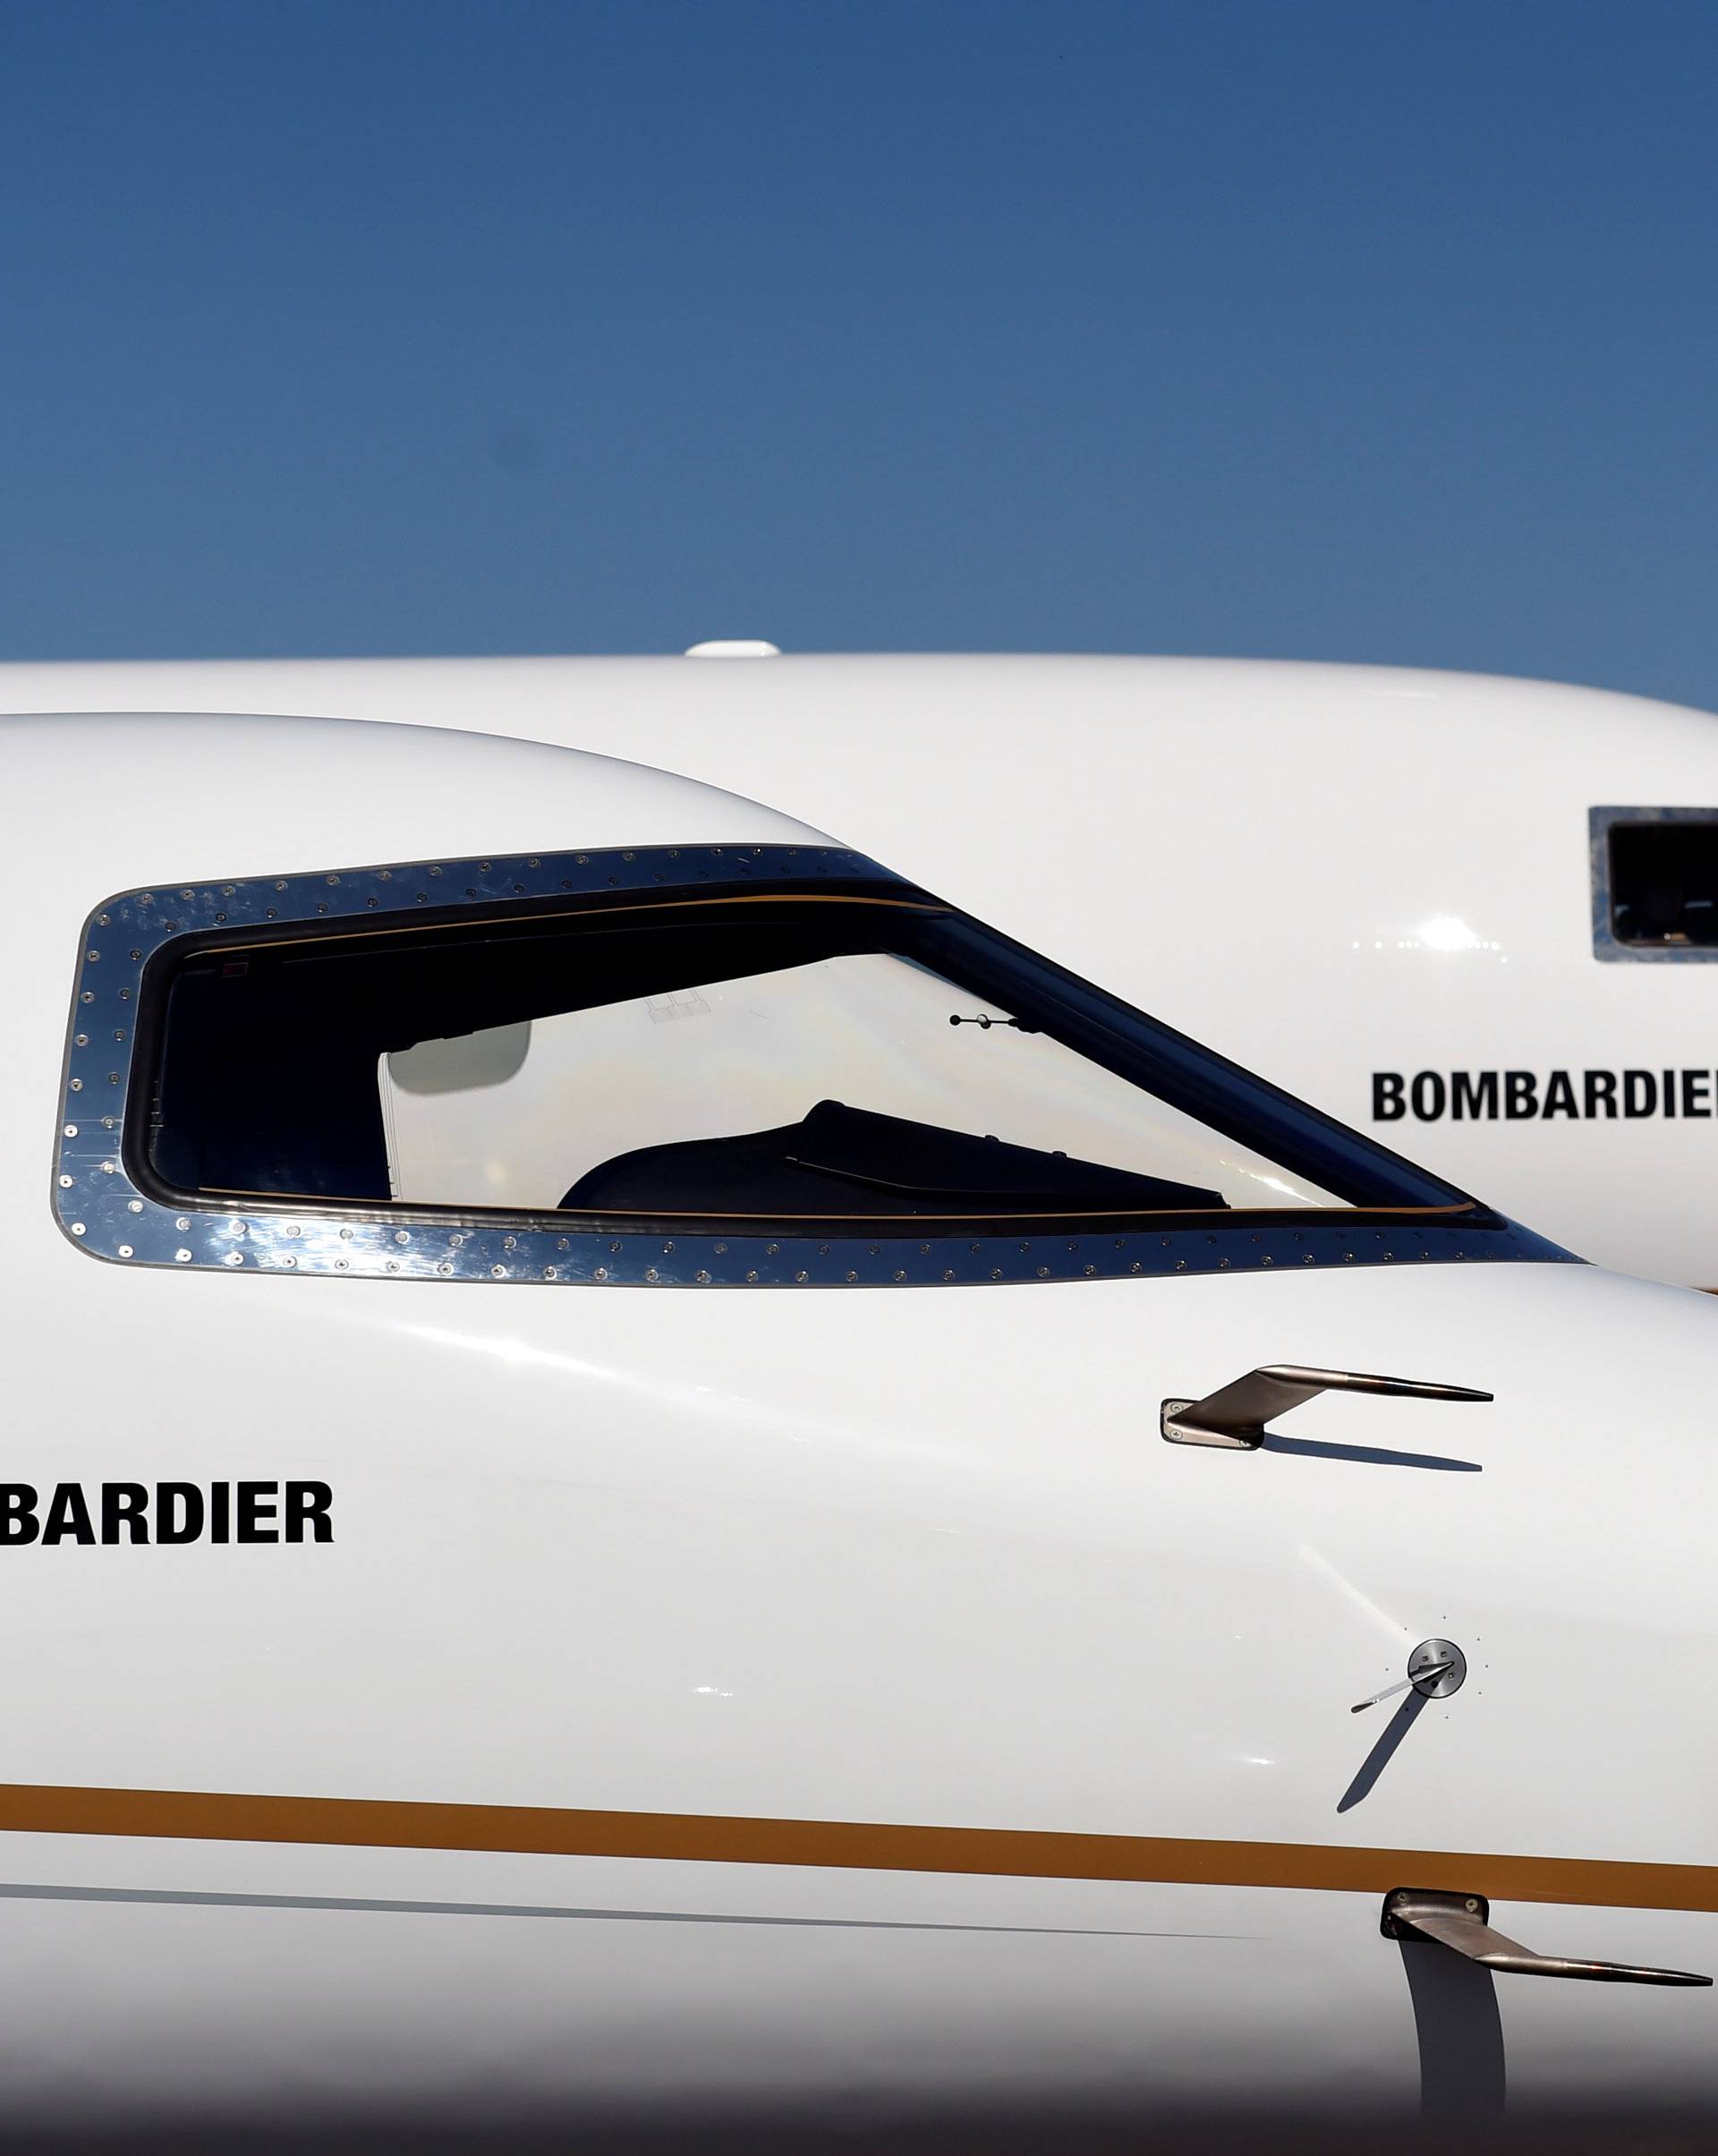 Bombardier's new Global 7000 business jet is seen parked next to a Learjet 75 during the National Business Aviation Association at the Henderson Executive Airport in Henderson